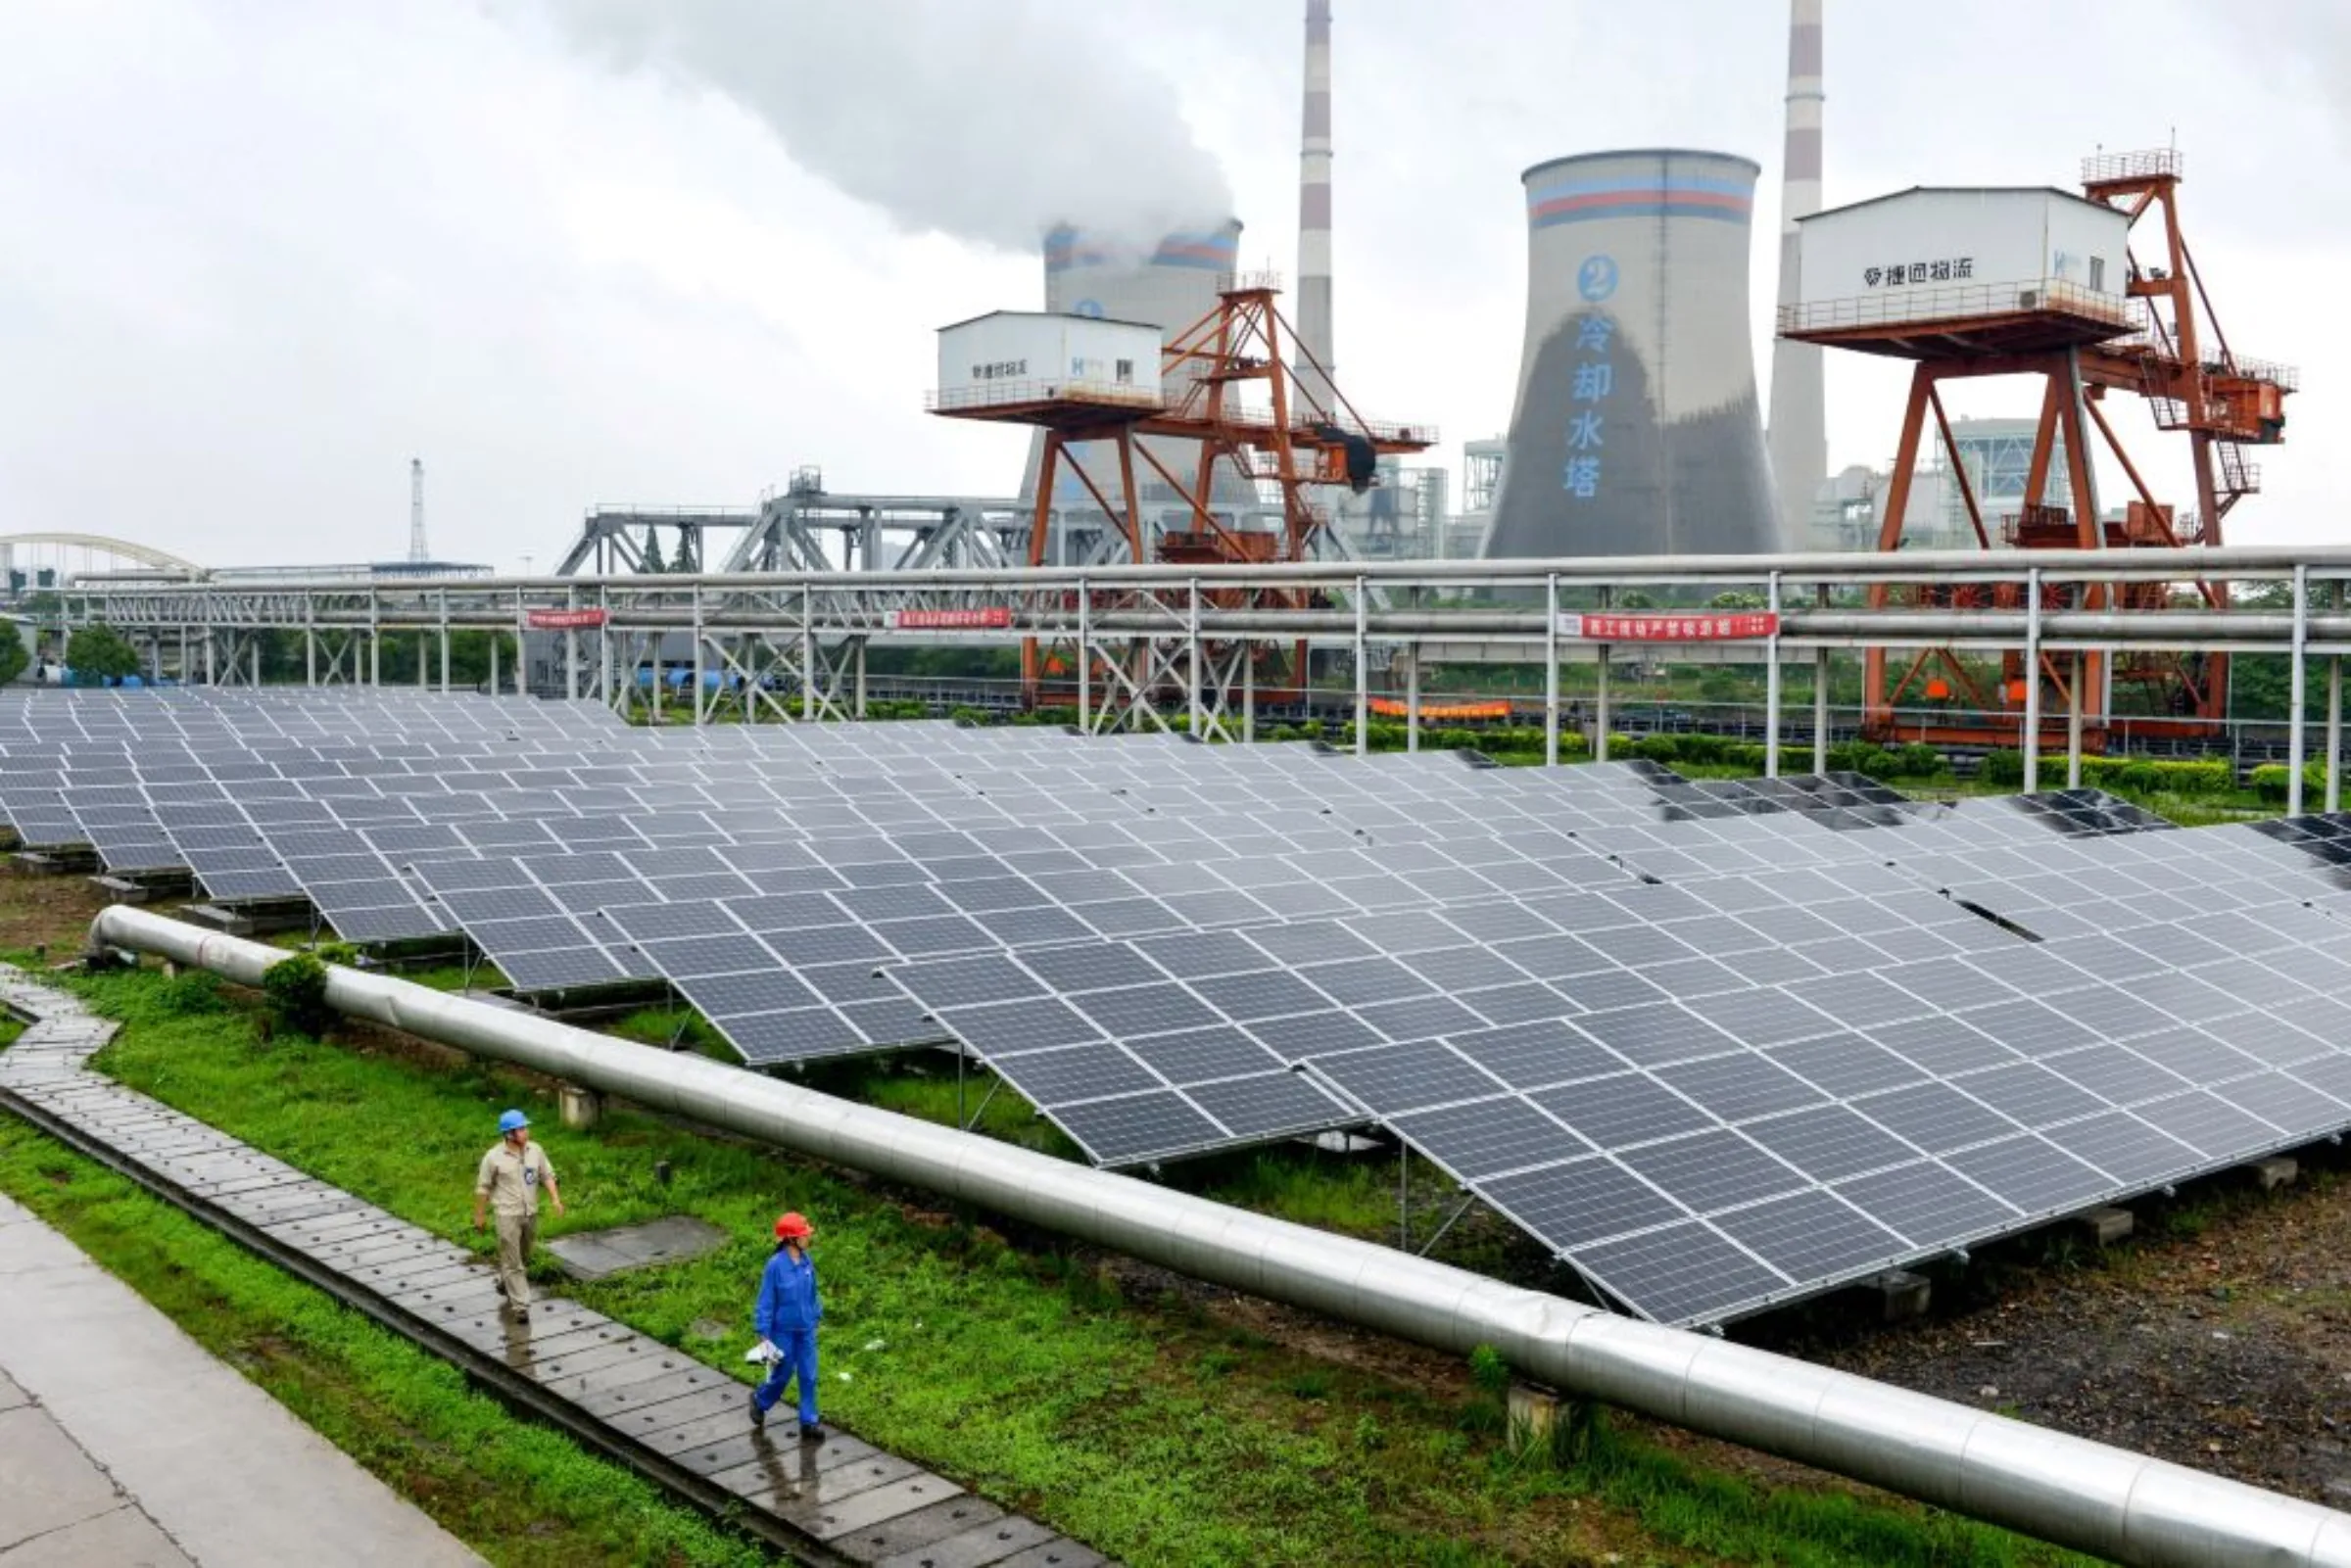 Employees check solar panels, as they work on a grid-connected photovoltaic power generation project, at a power plant in Changxing County, Zhejiang Province, China June 13, 2017